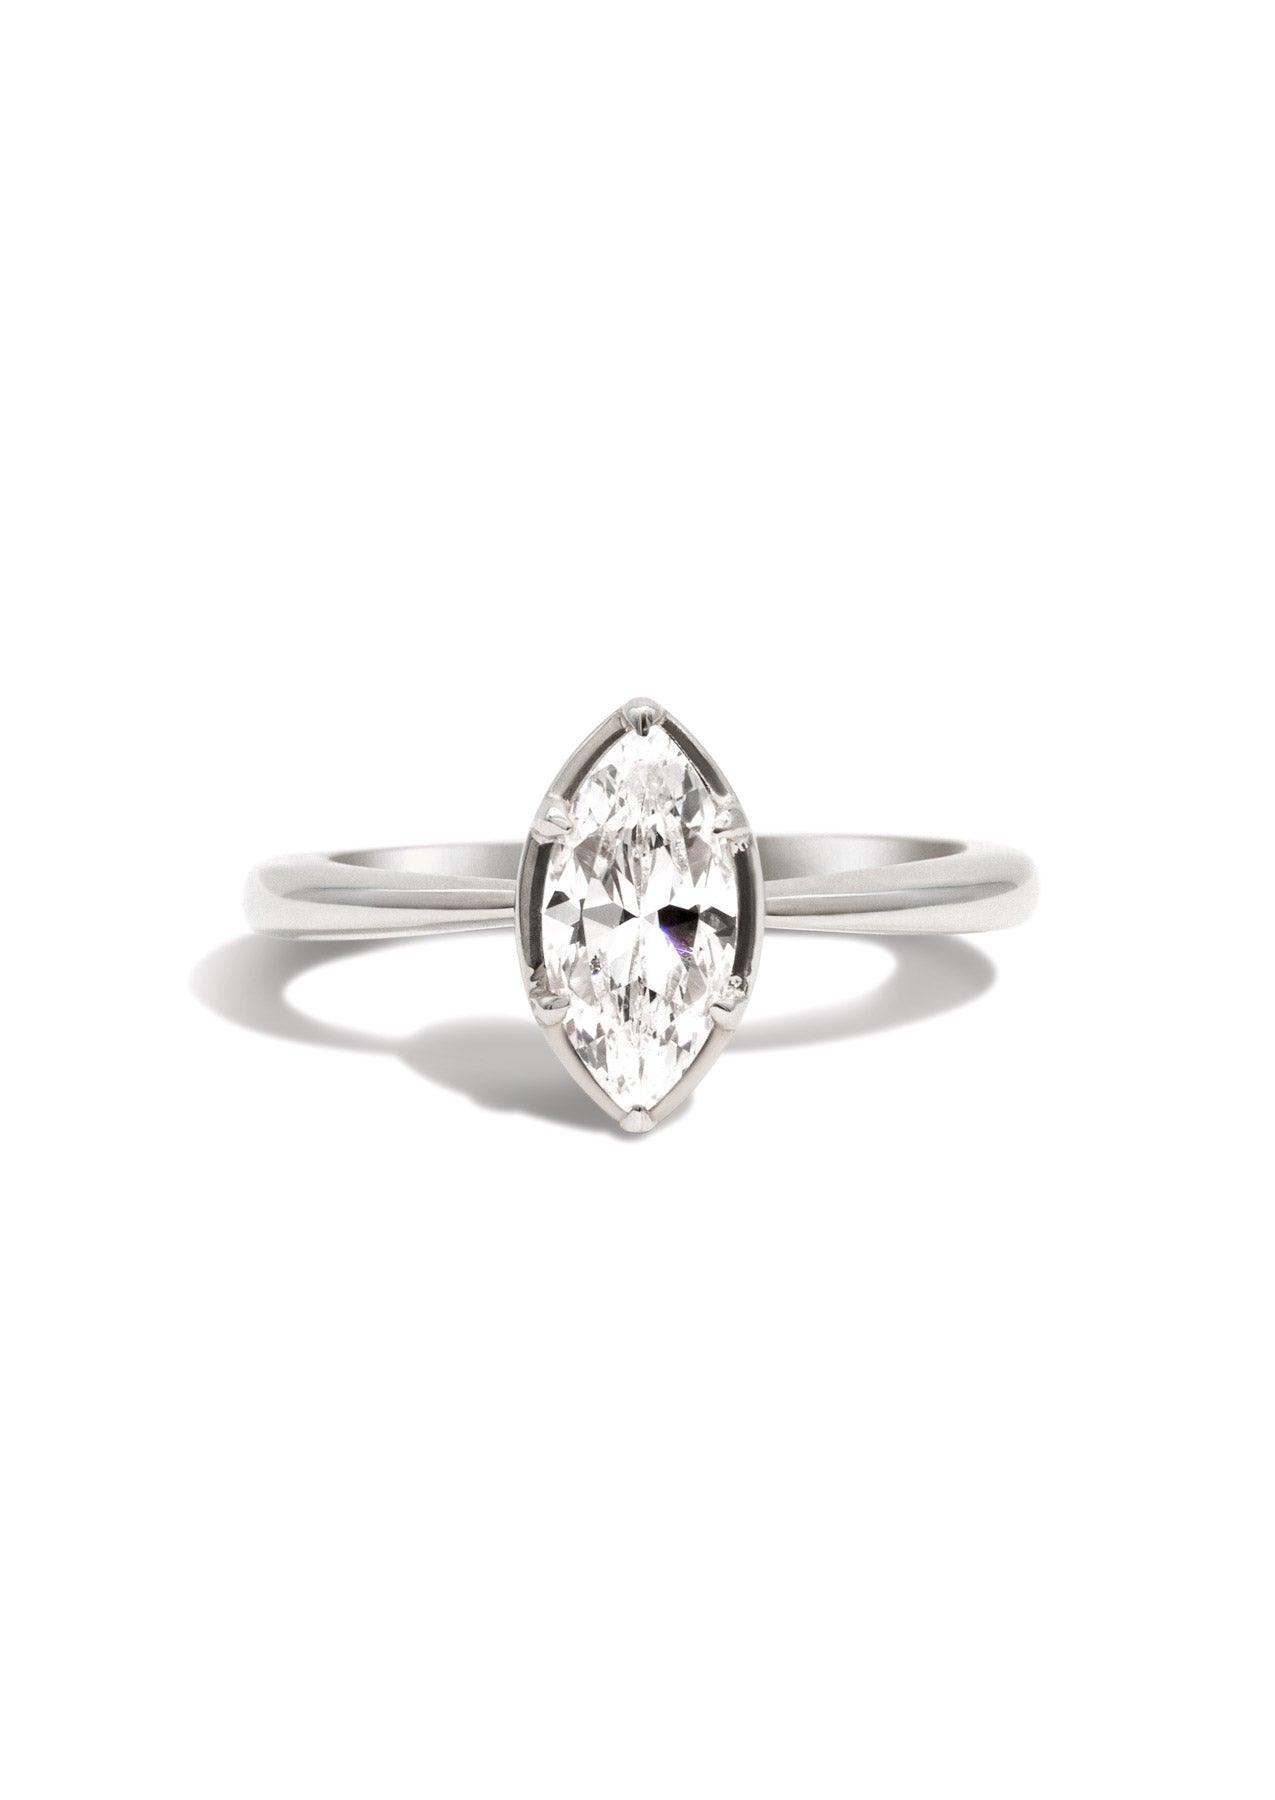 The Mabel White Gold Cultured Diamond Ring